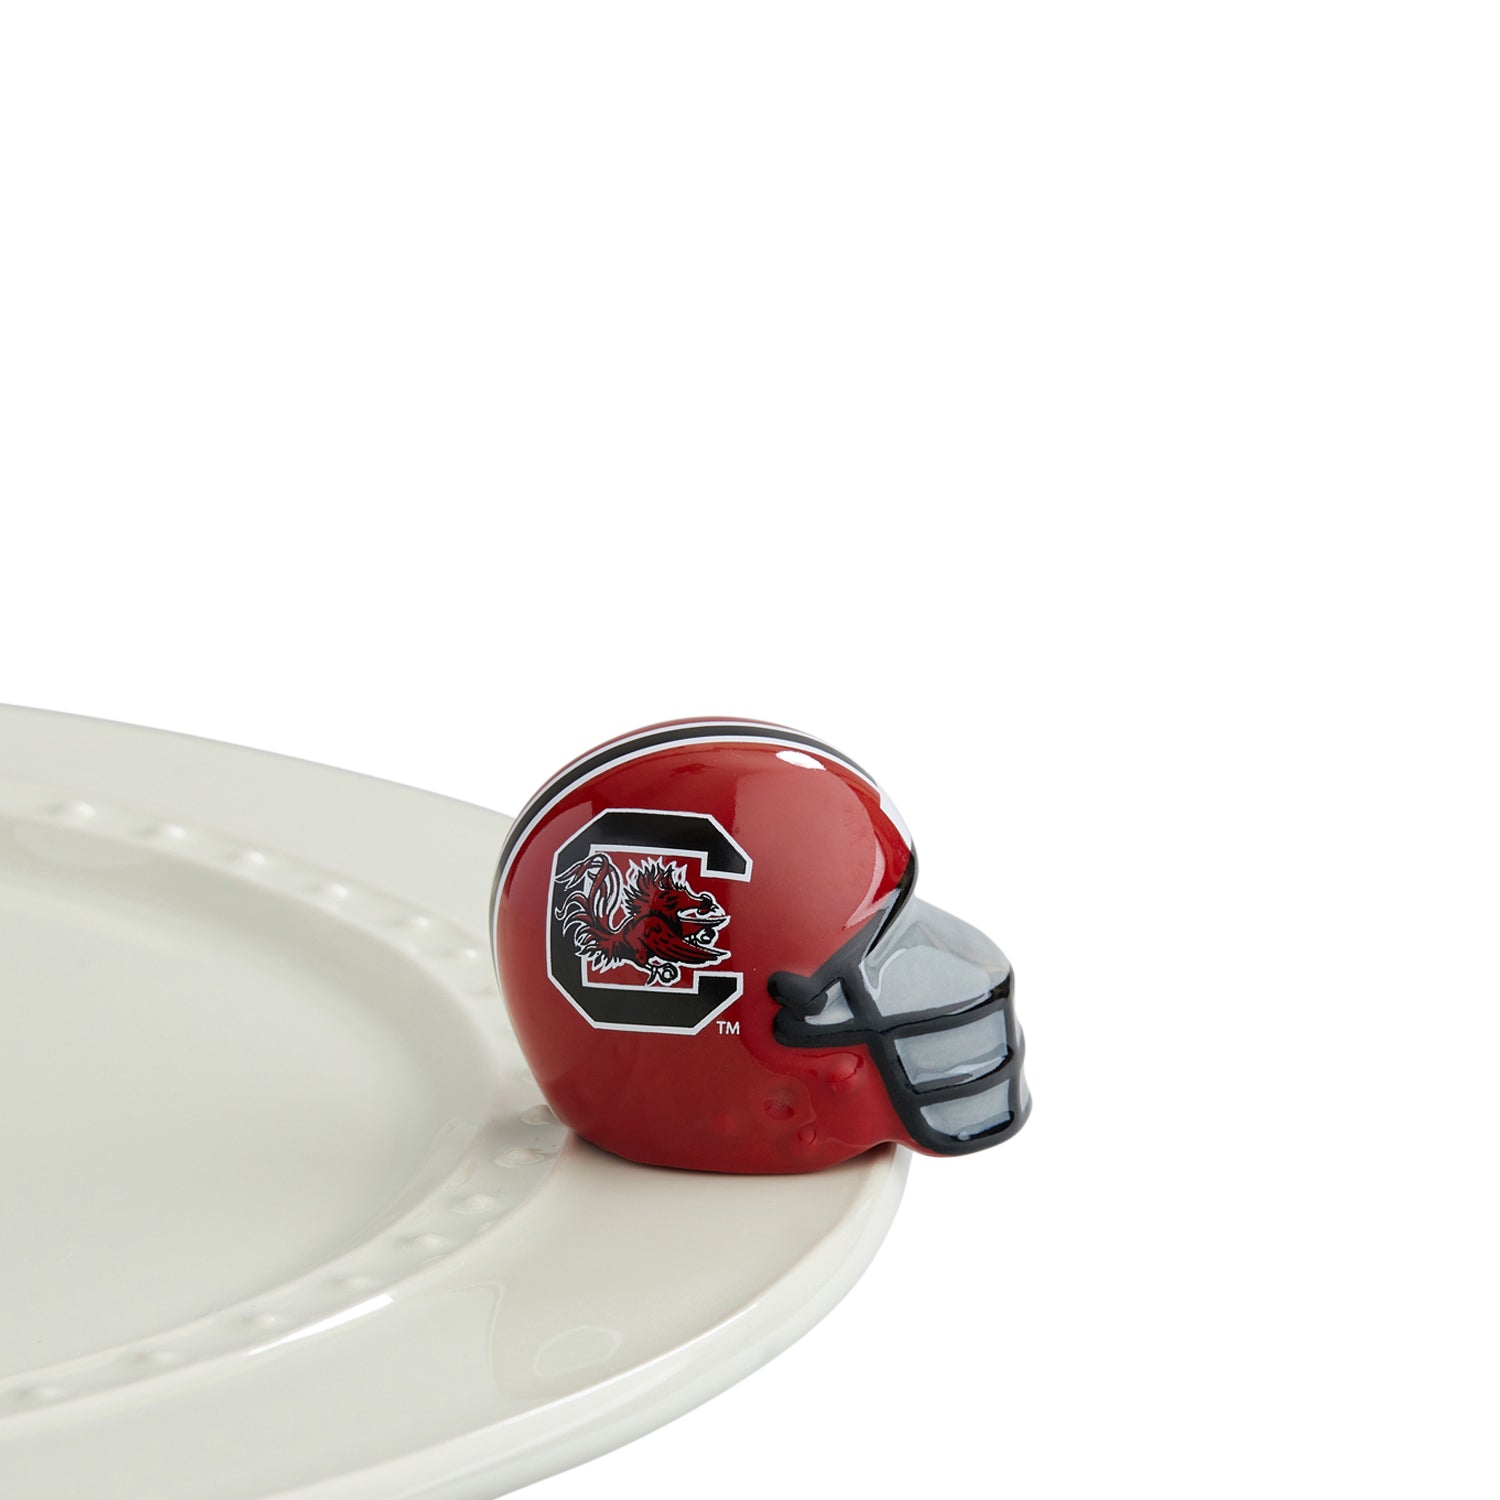 Nora Fleming South Carolina Helmet mini. Official licensed University of South Carolina helmet. Shop at The Painted Cottage in Edgewater, MD.